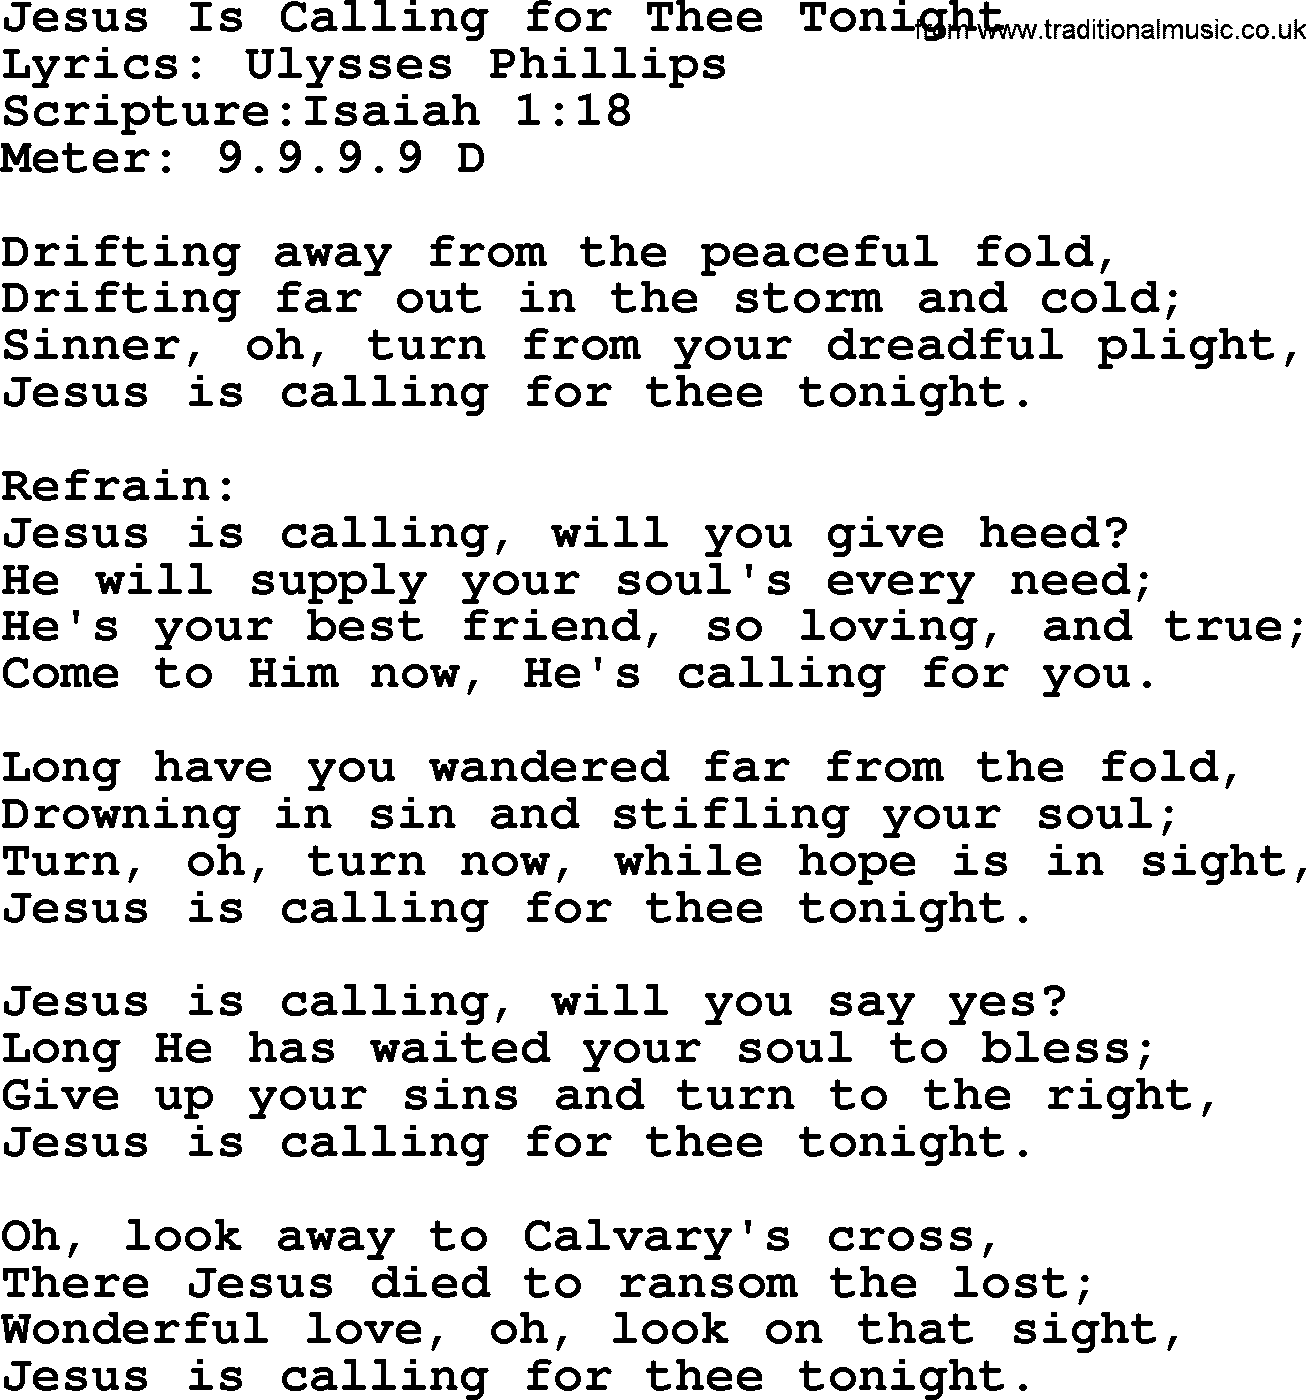 Hymns about  Angels, Hymn: Jesus Is Calling for Thee Tonight, lyrics, sheet music, midi & Mp3 music with PDF